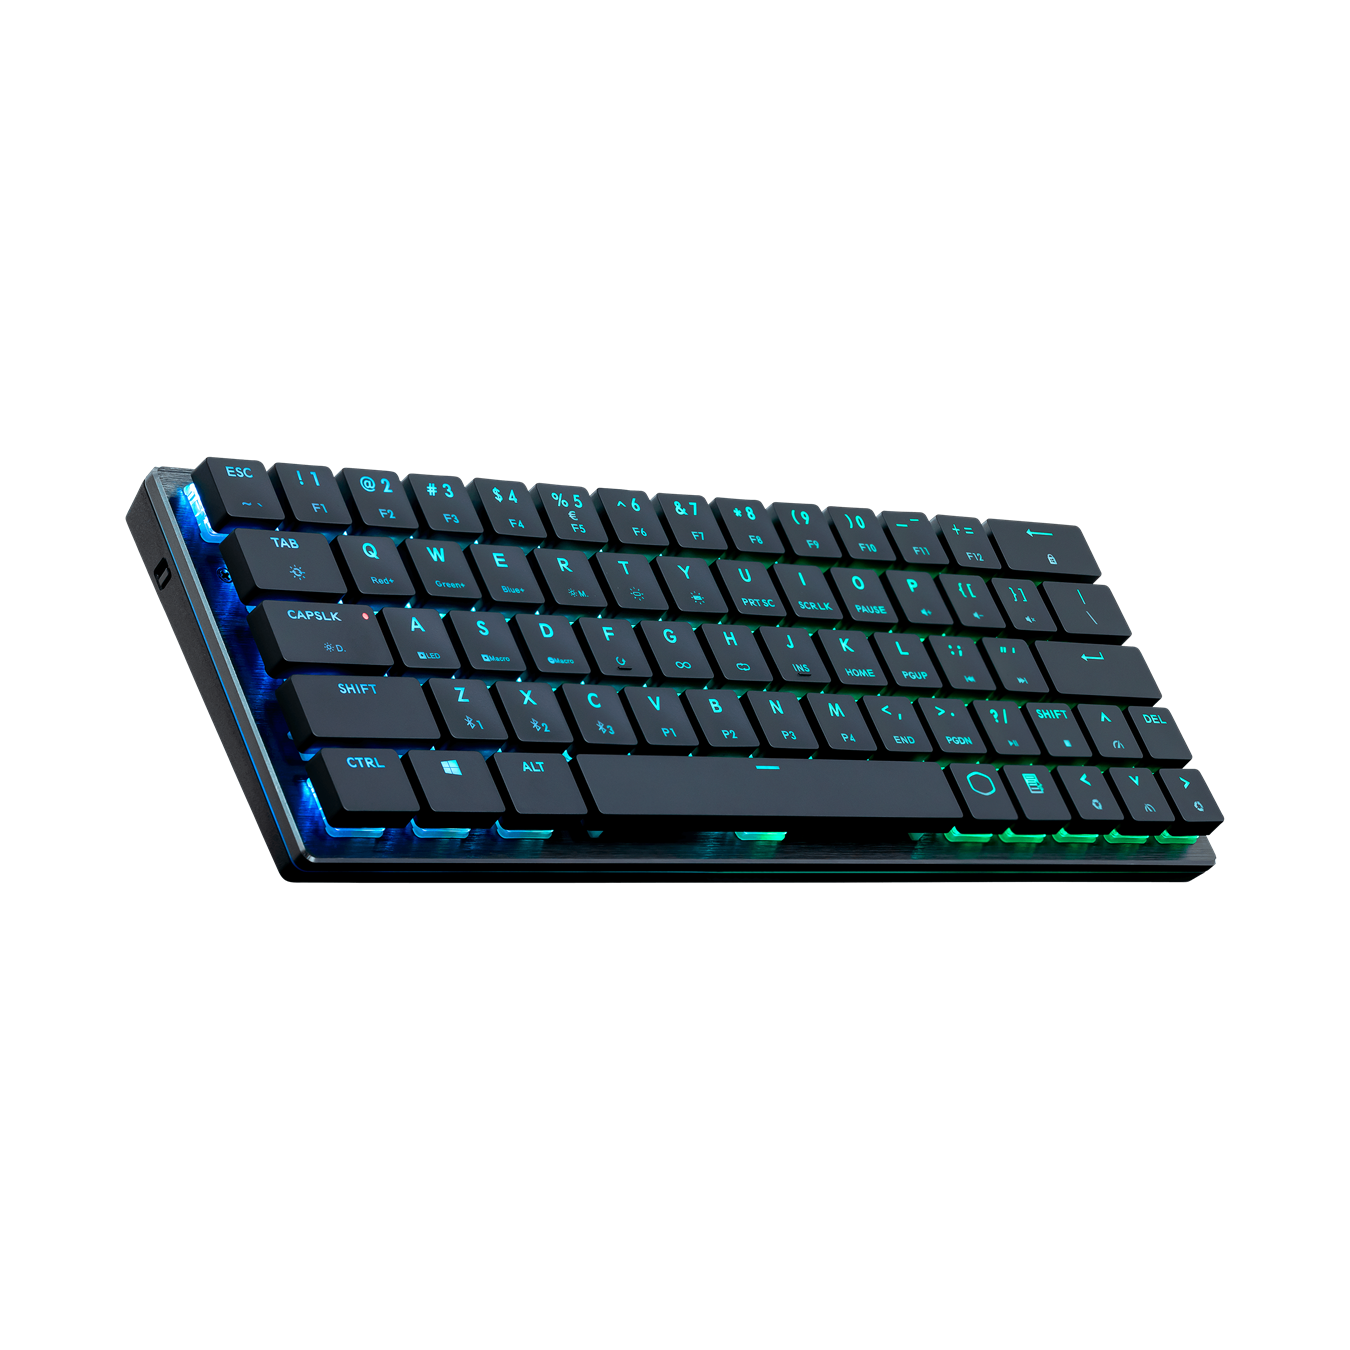 SK621 Low Profile Wireless Mechanical Keyboard - comes with hybrid wireless functionality, giving you the choice of clean, wireless freedom or lag-free wired functionality